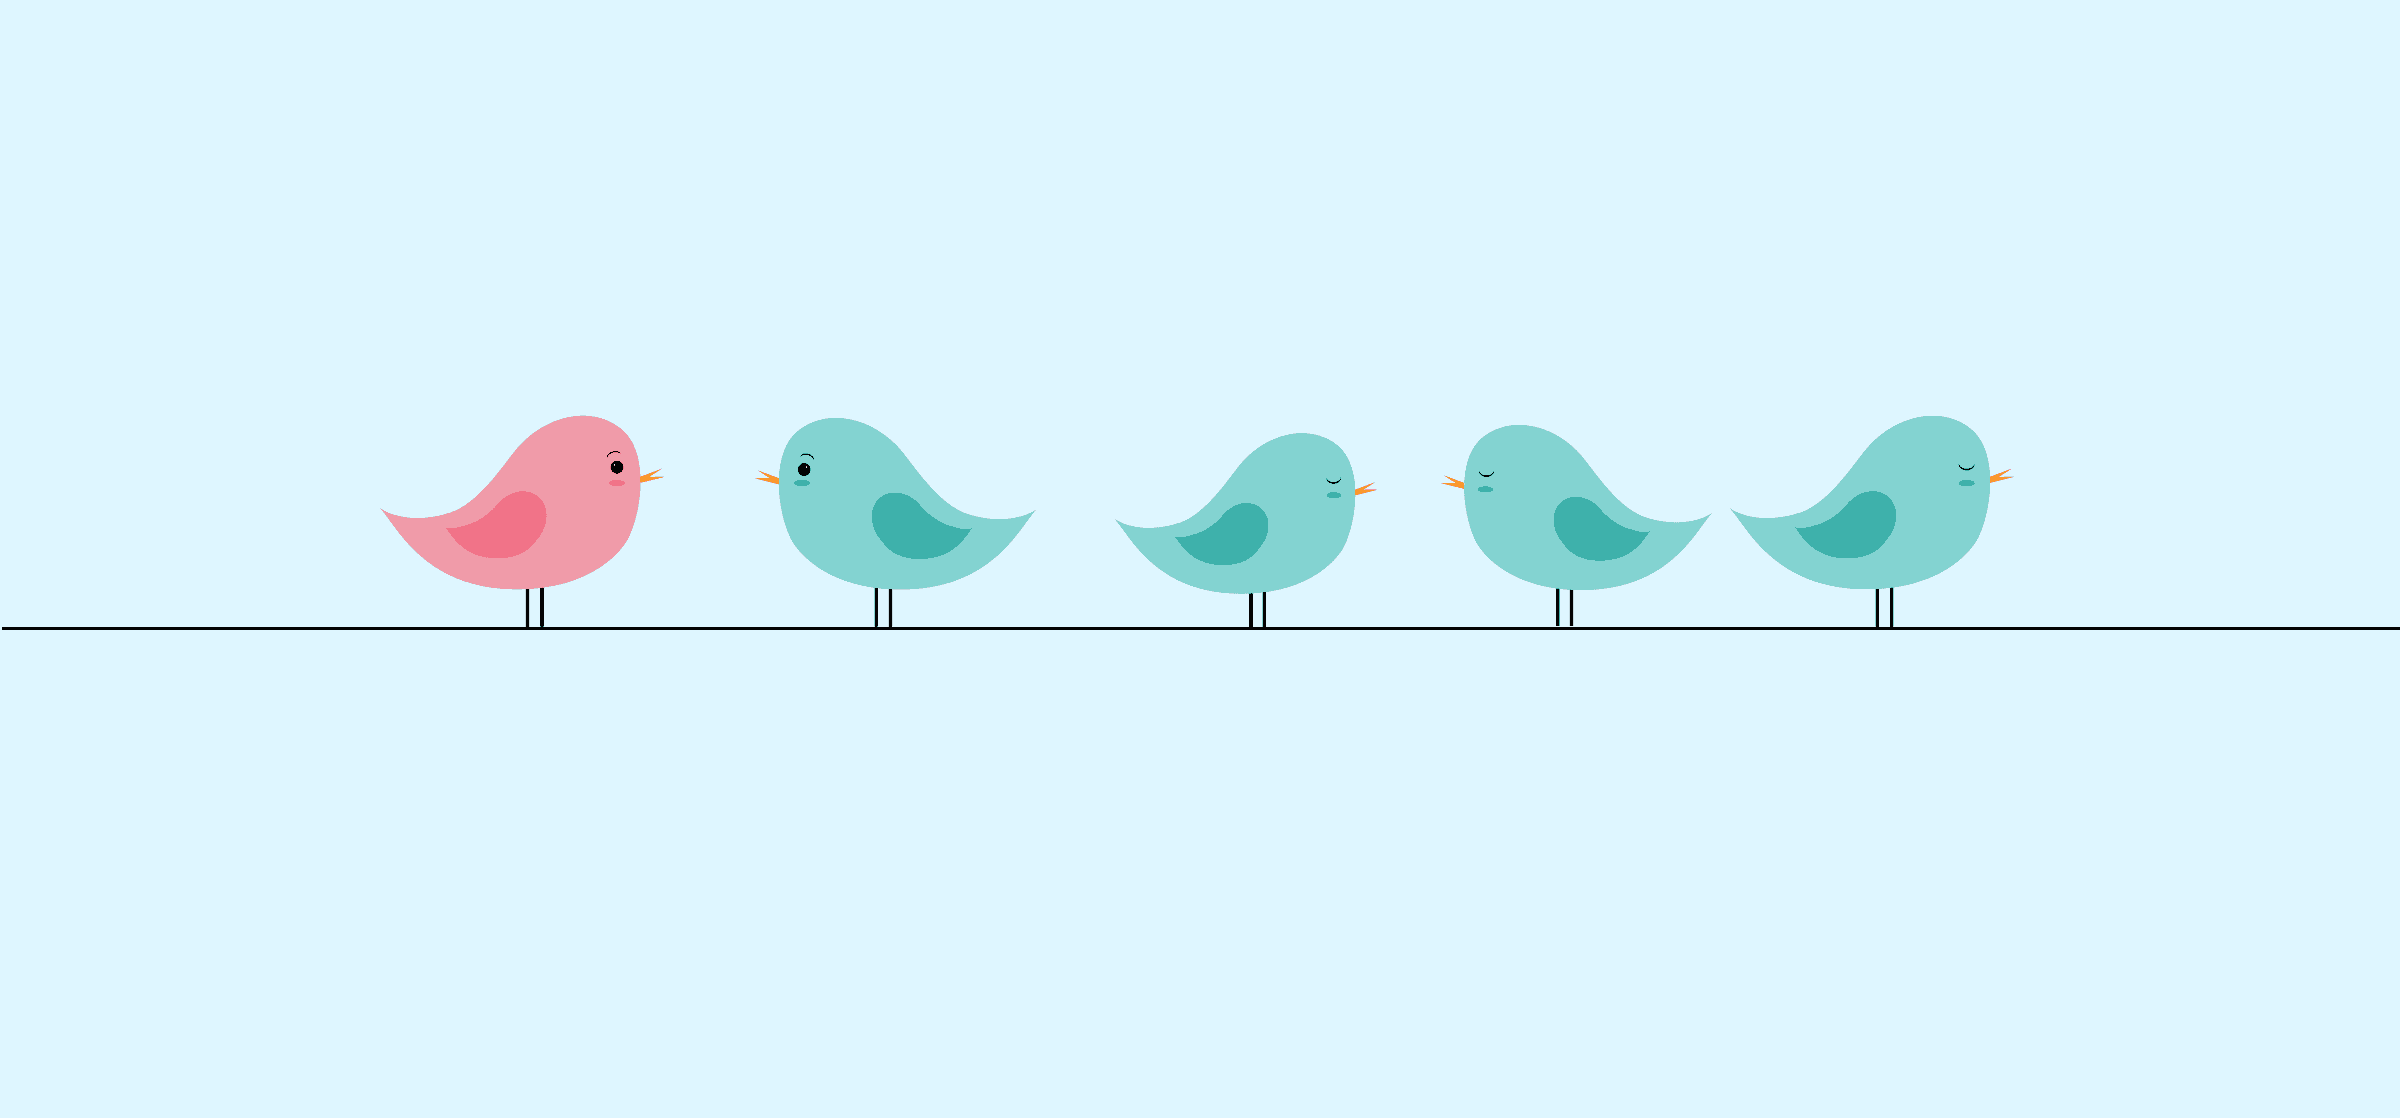 Birds of multiple colors, representing going from new hire to full collaborator